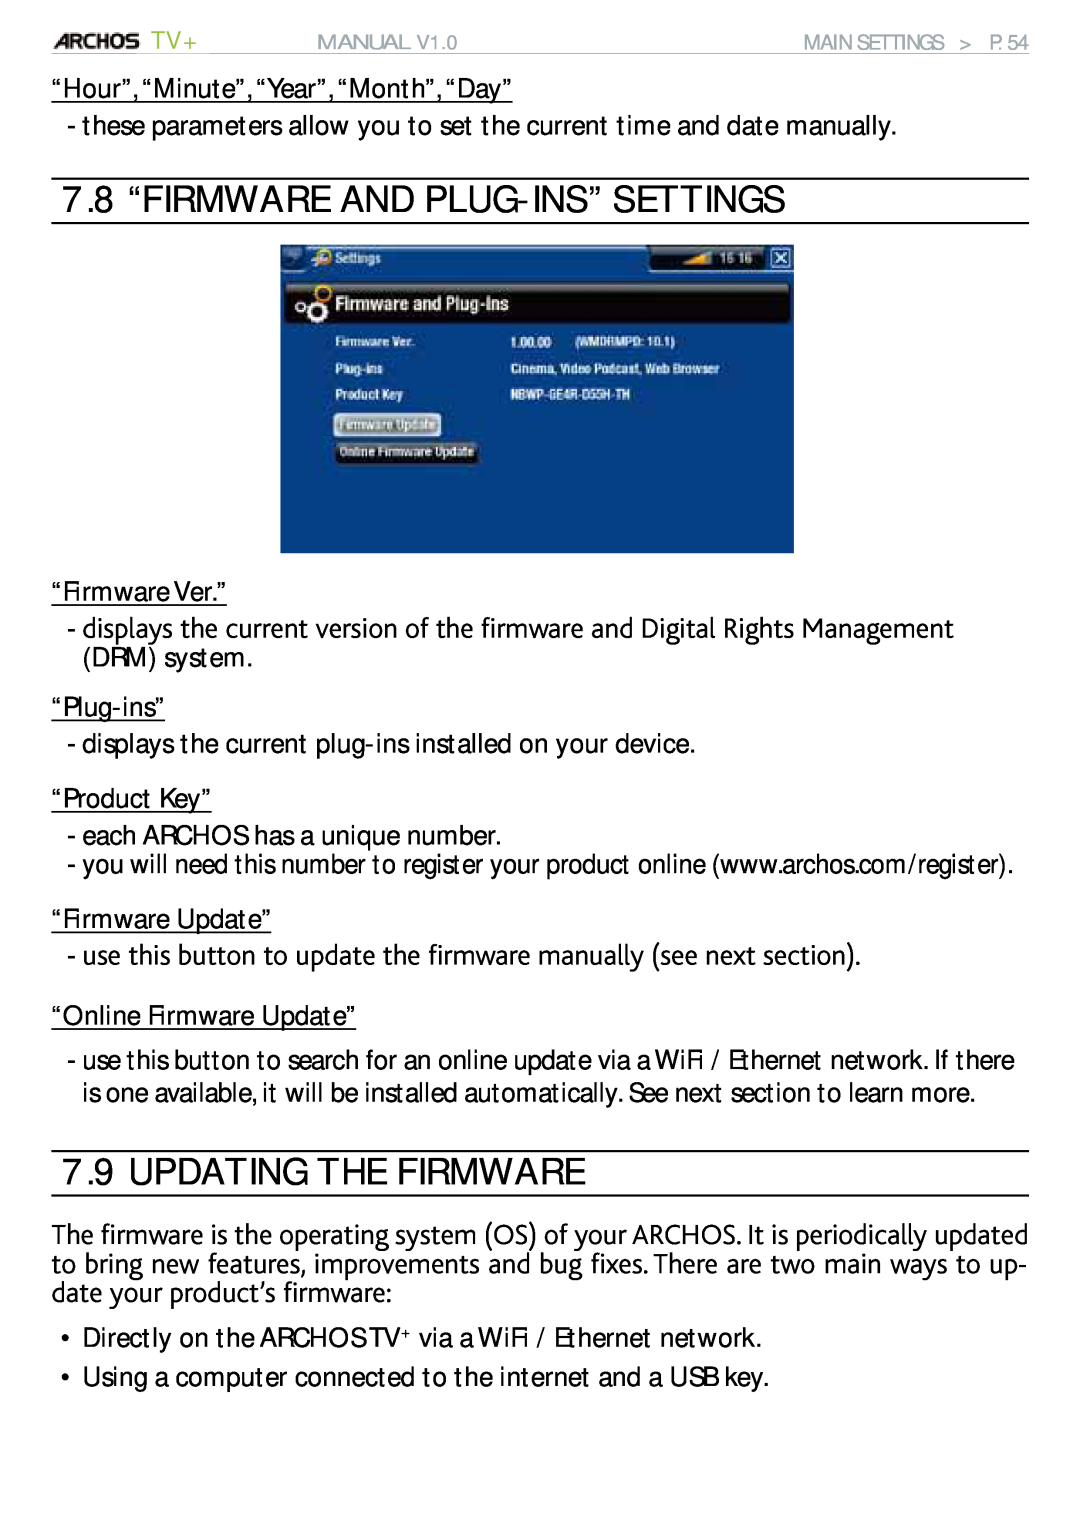 Archos 500973 user manual 7.8 “FIRMWARE AND PLUG-INS” SETTINGS, Updating The Firmware 